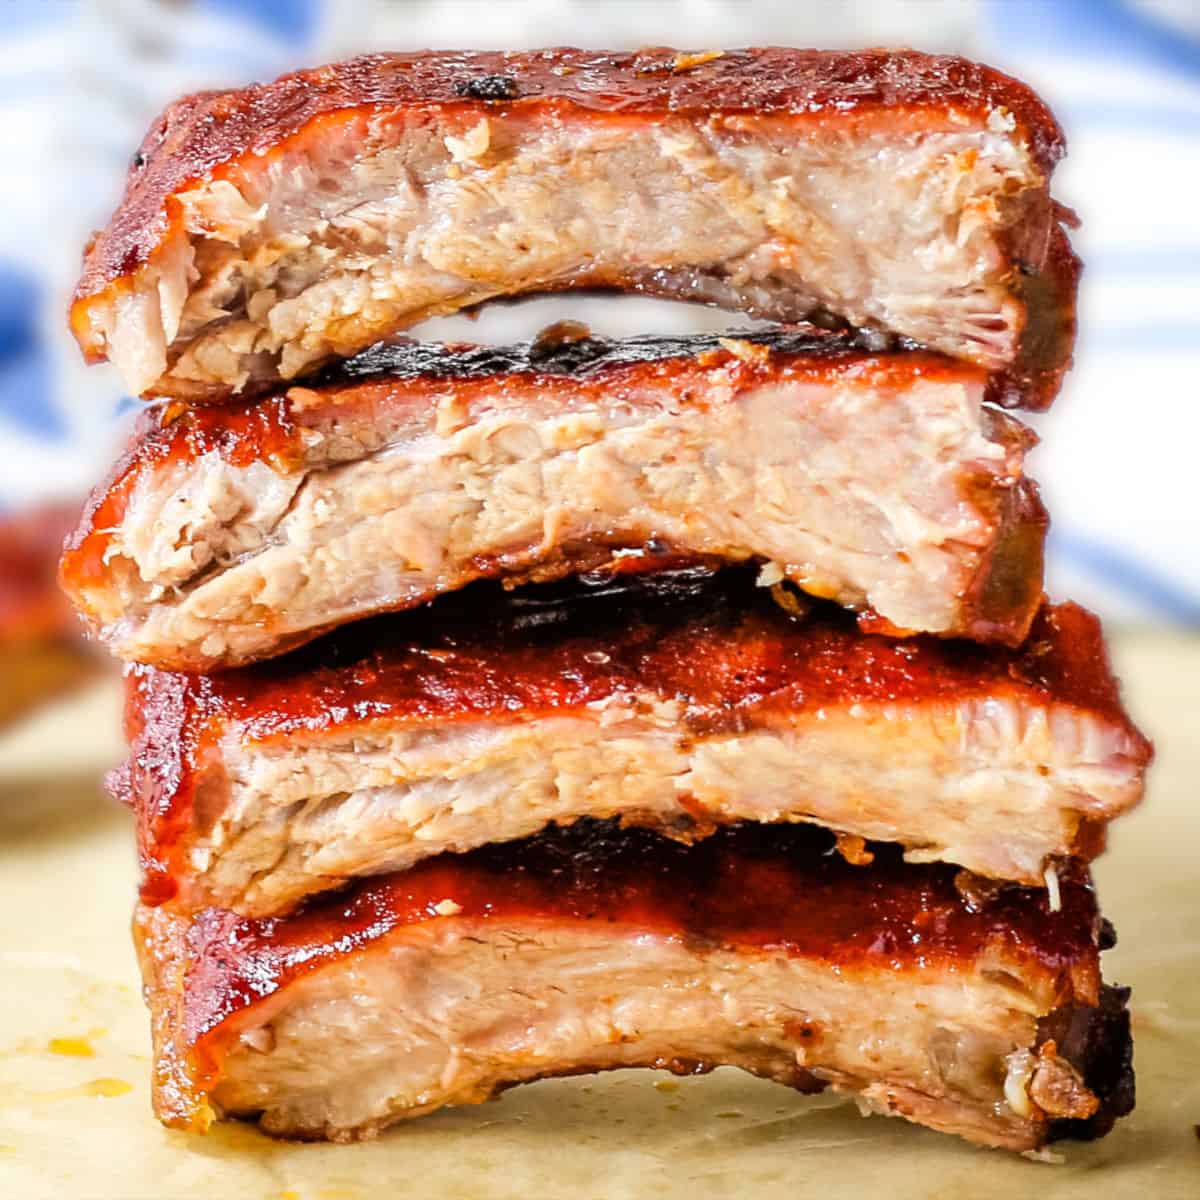 Sliced baby back ribs stacked on top of each other.